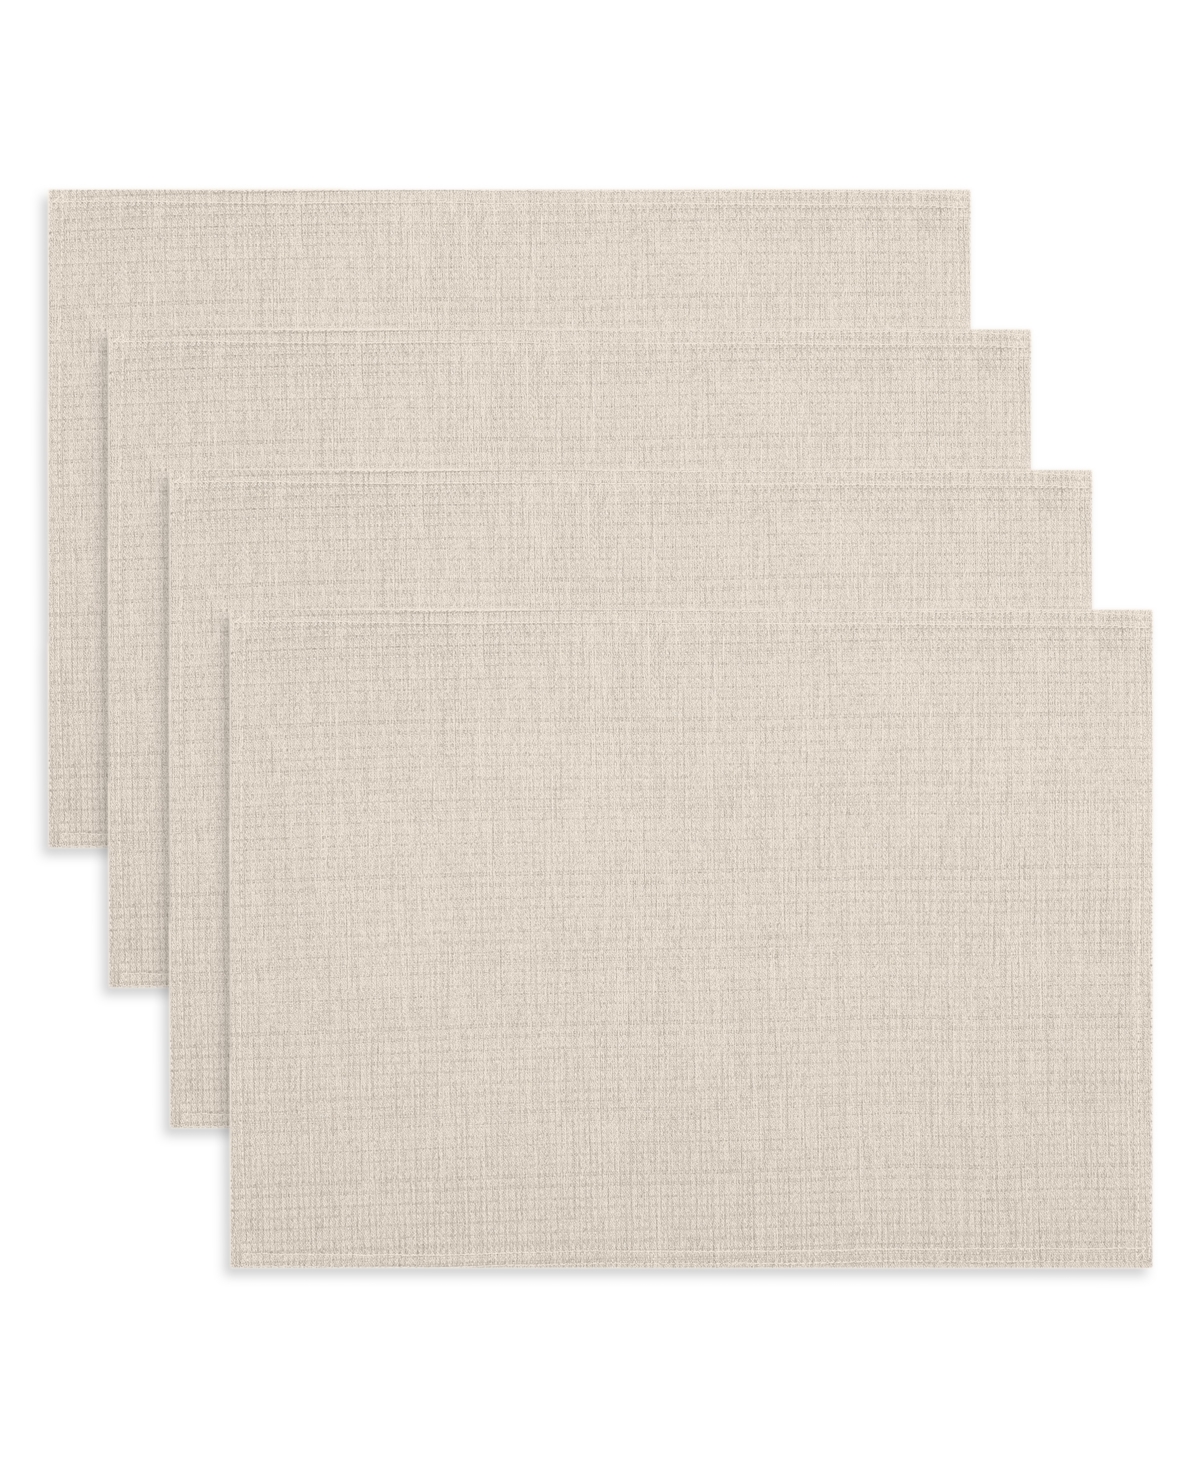 Noritake Colorwave Placemats 13" X 18", Set Of 4 In Cream